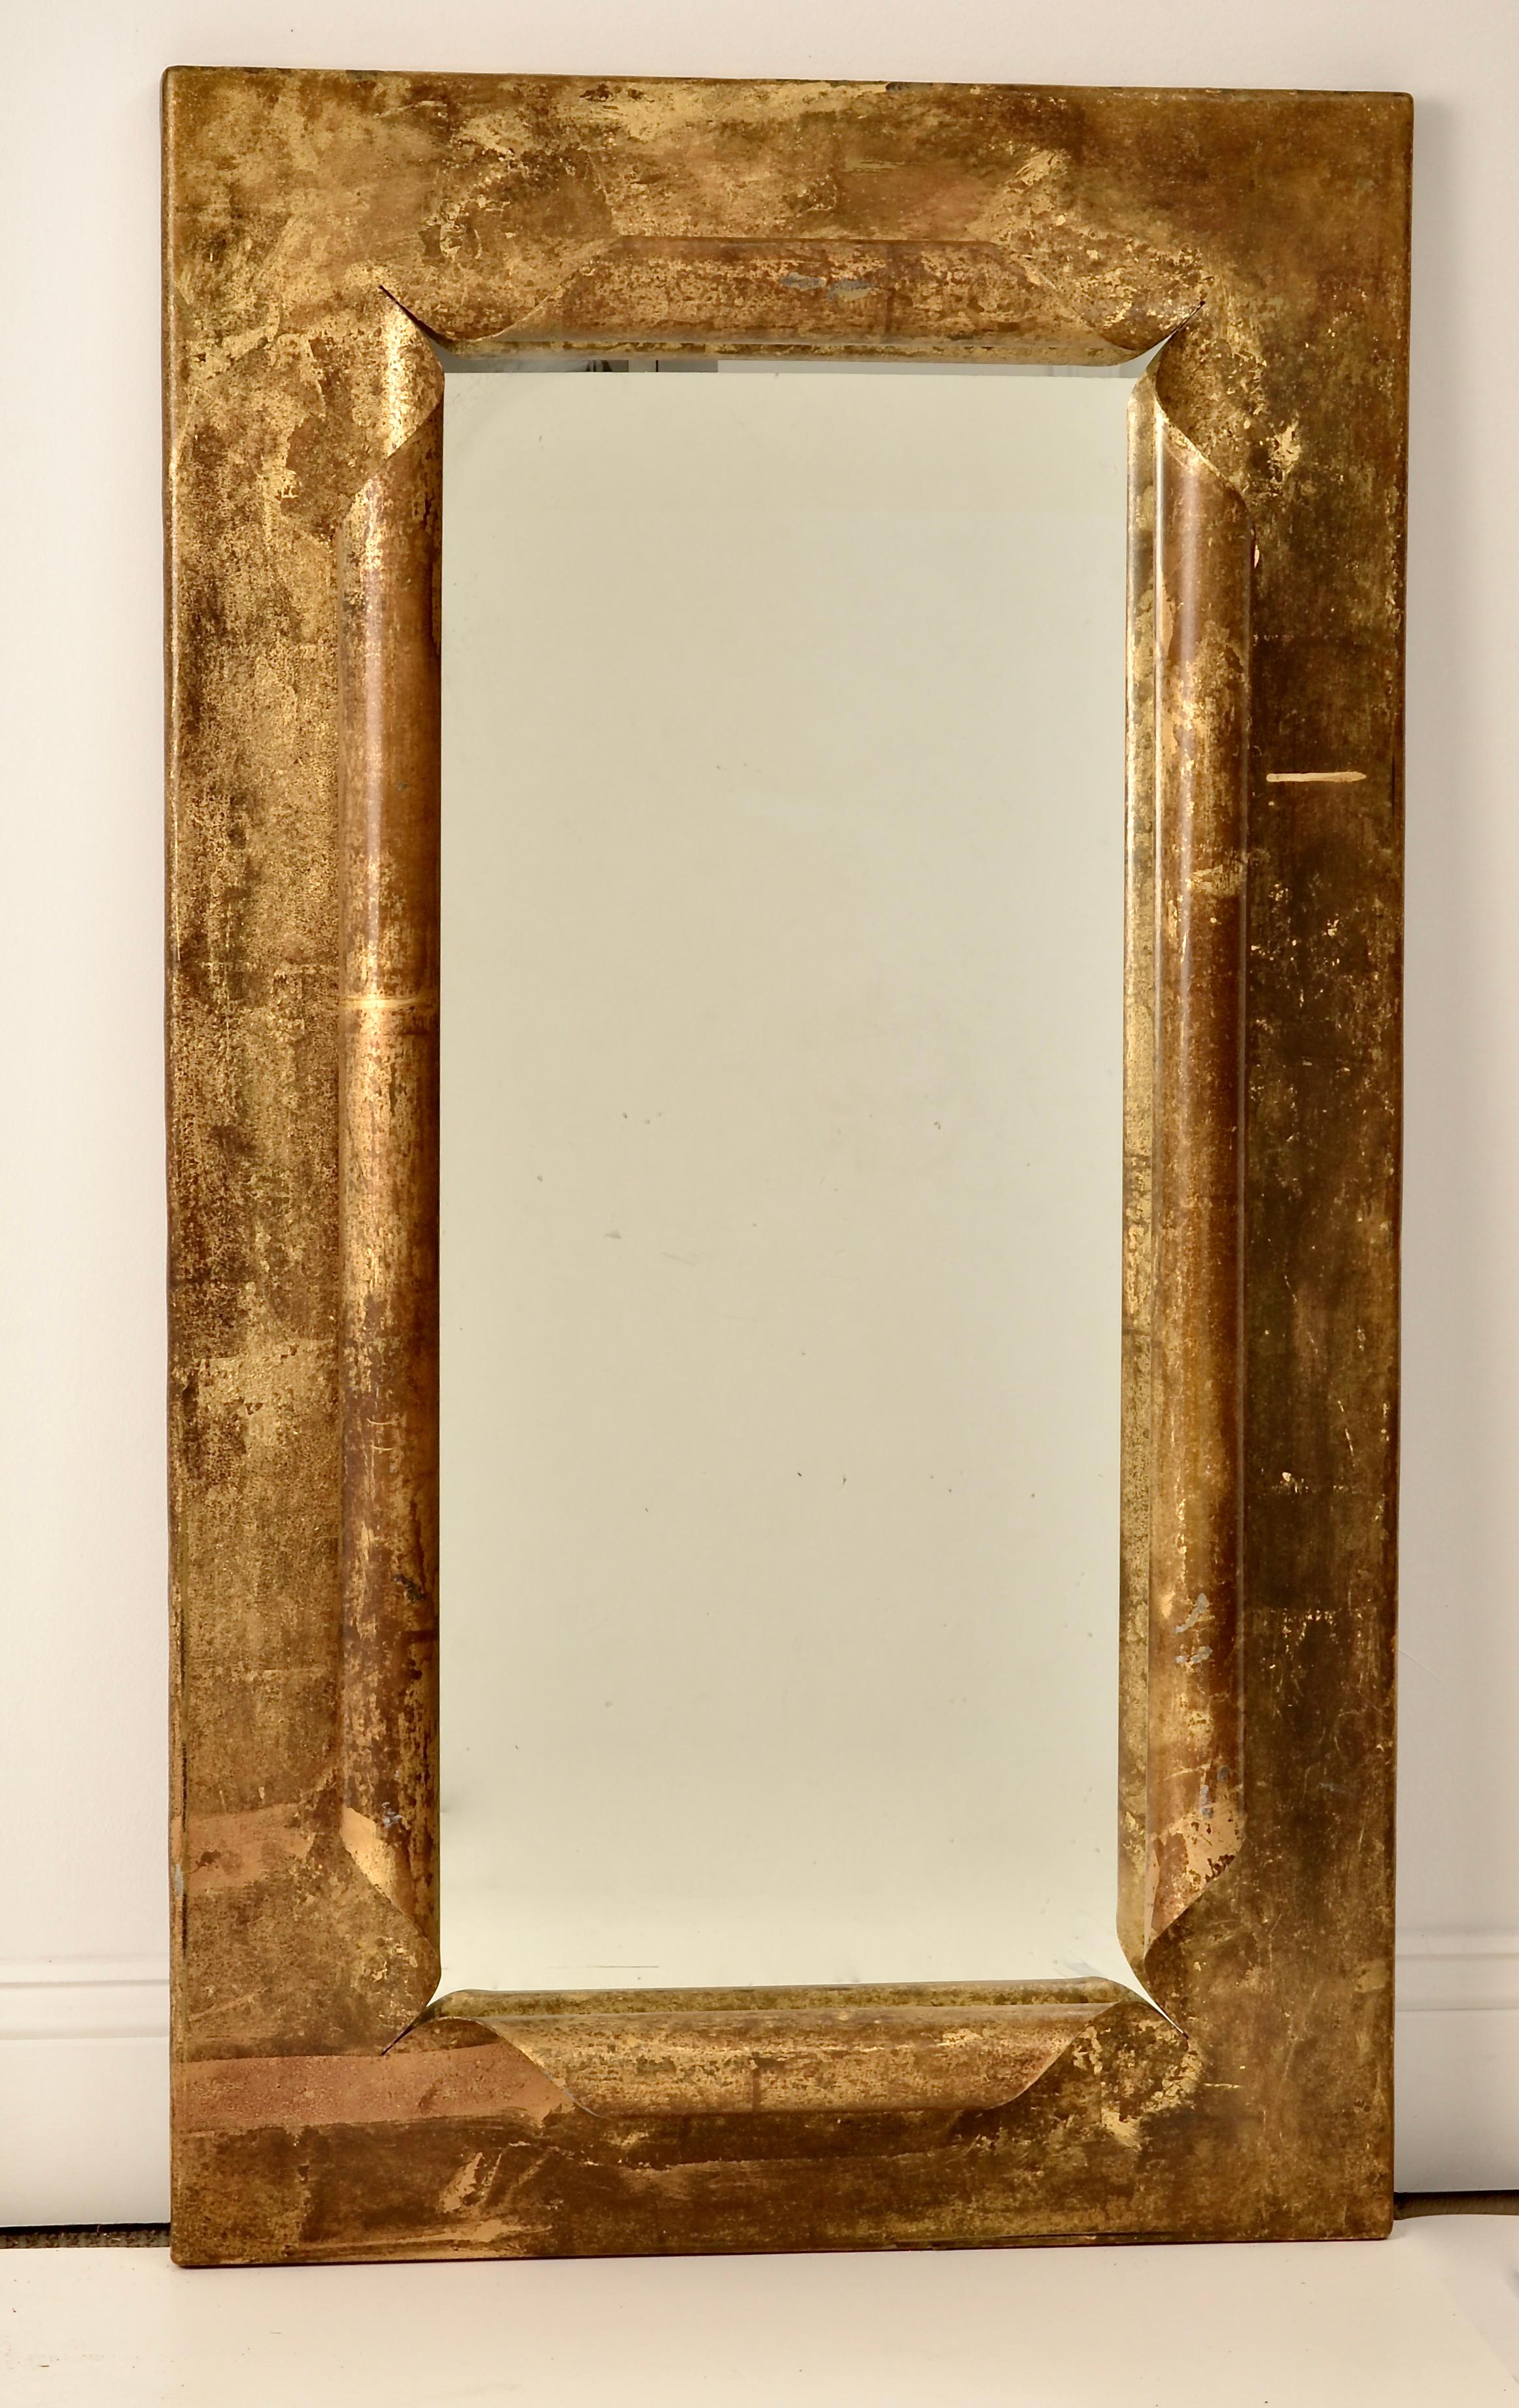 Great architectural form on this steel mirror with curled edge decoration. Hand applied antiqued gilding. Substantial, fine quality.